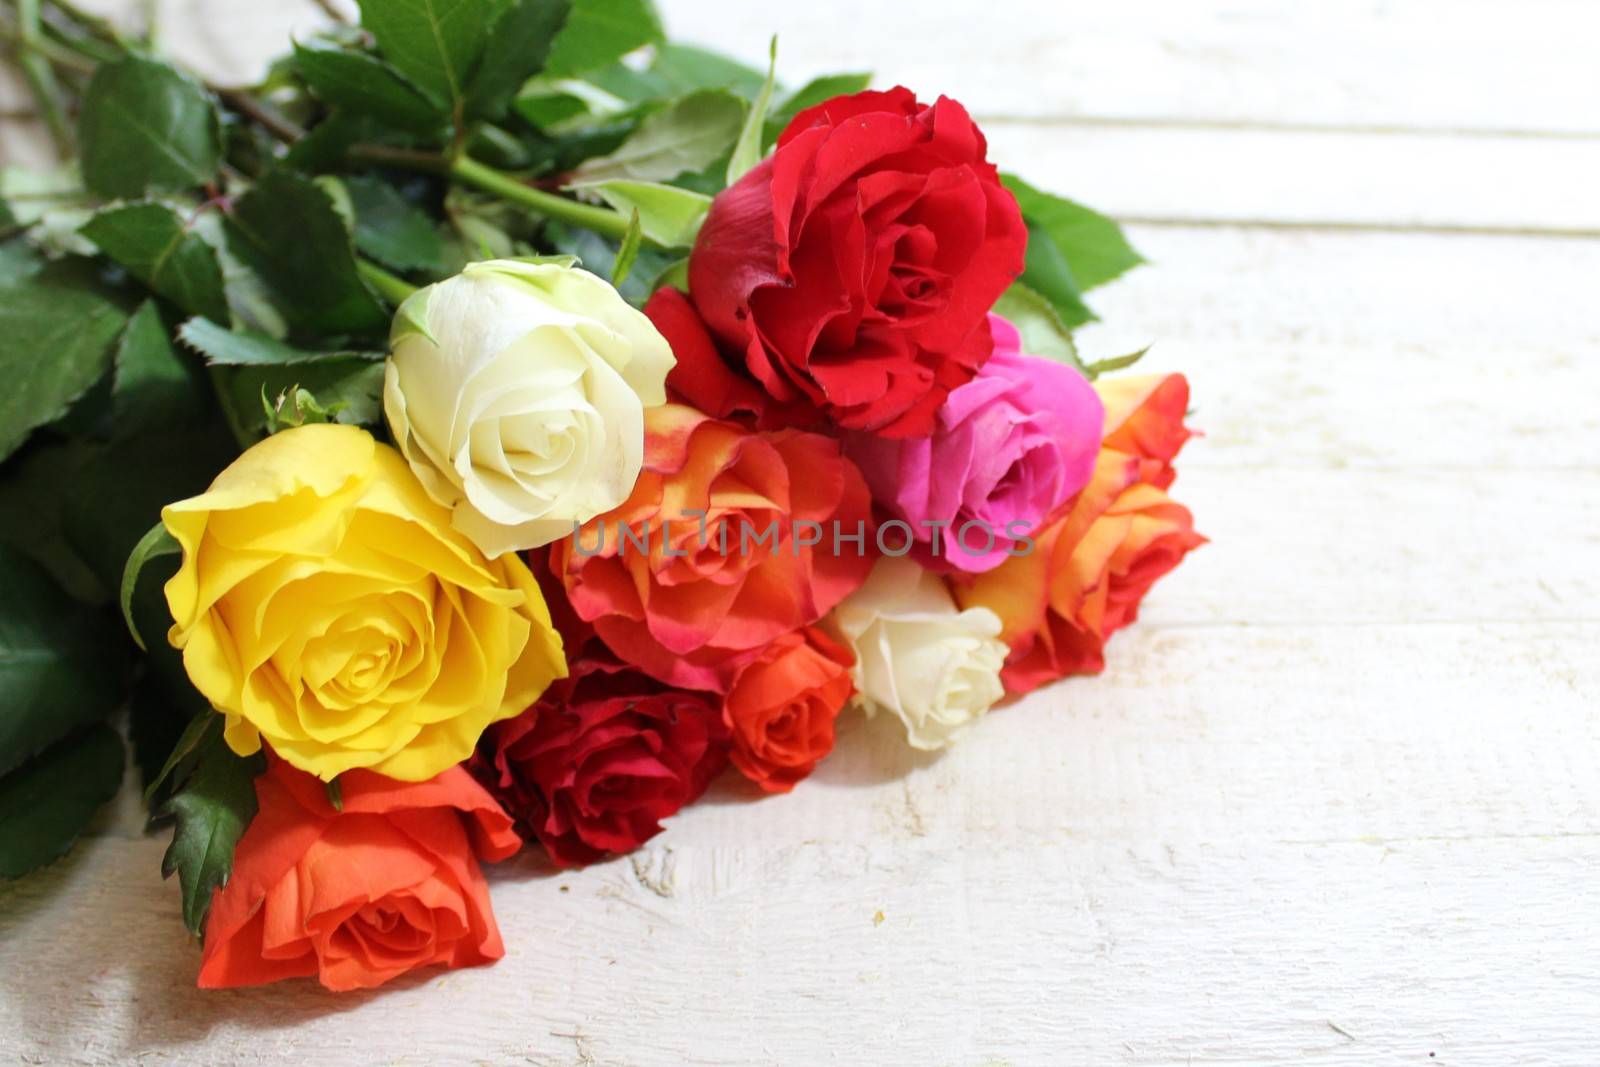 The pictureshows colorful roses on white wood.